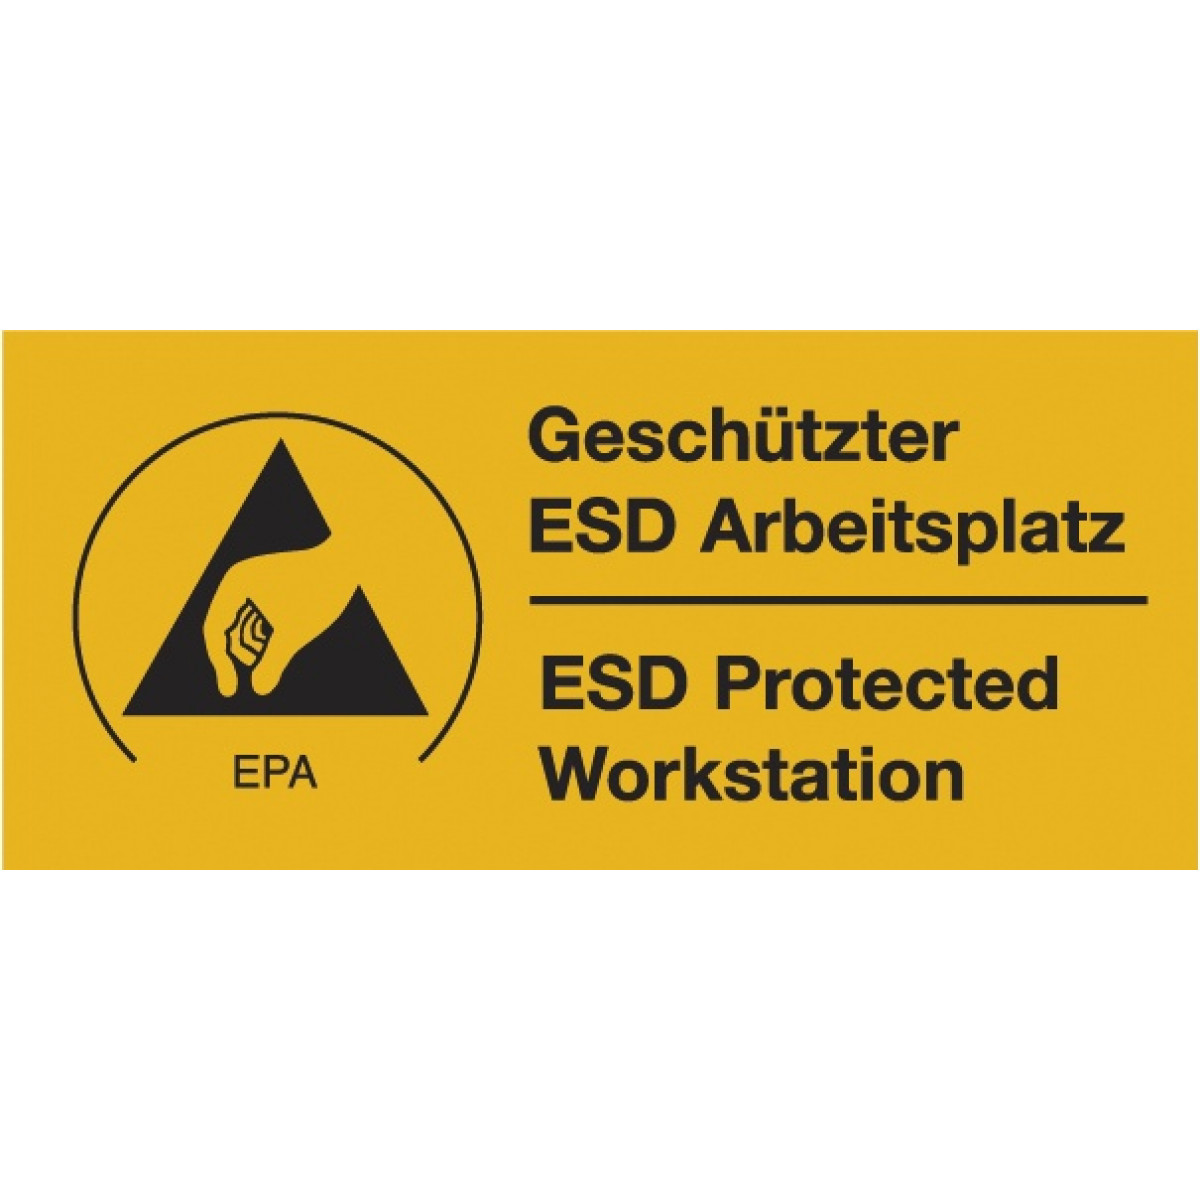 ESD protected workplace